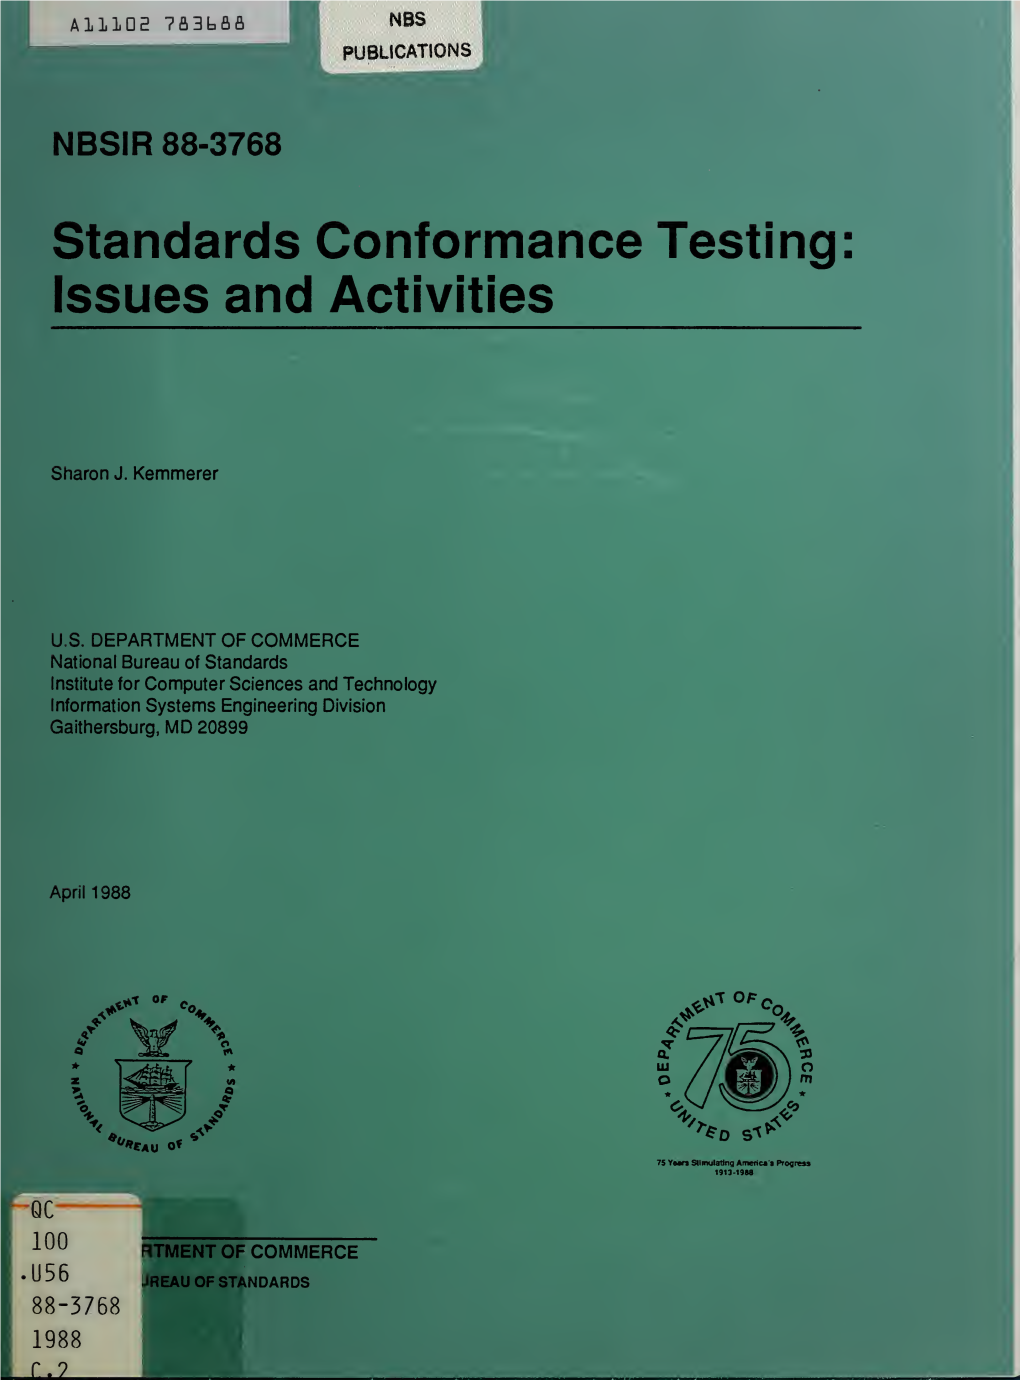 Standards Conformance Testing: Issues and Activities